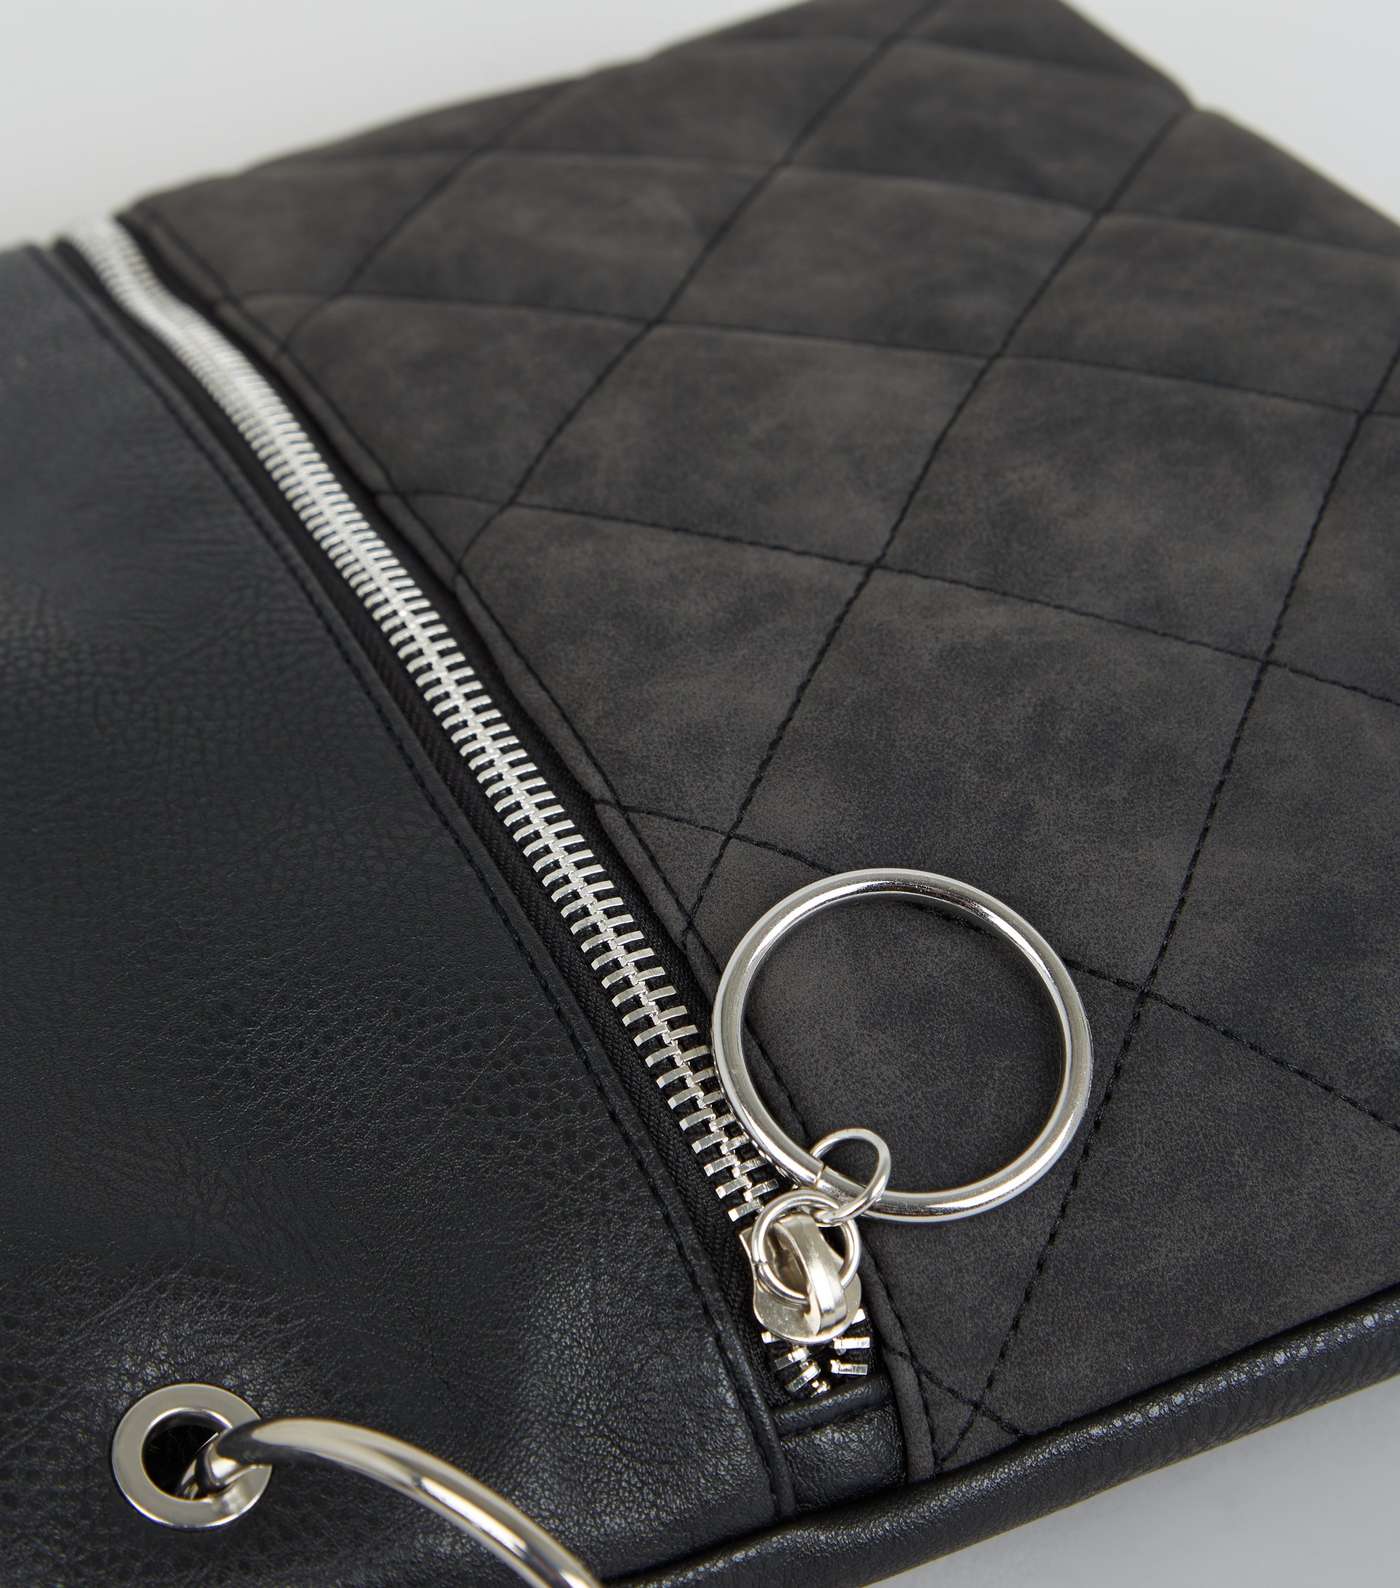 Black Leather-Look Quilted Cross Body Bag Image 4